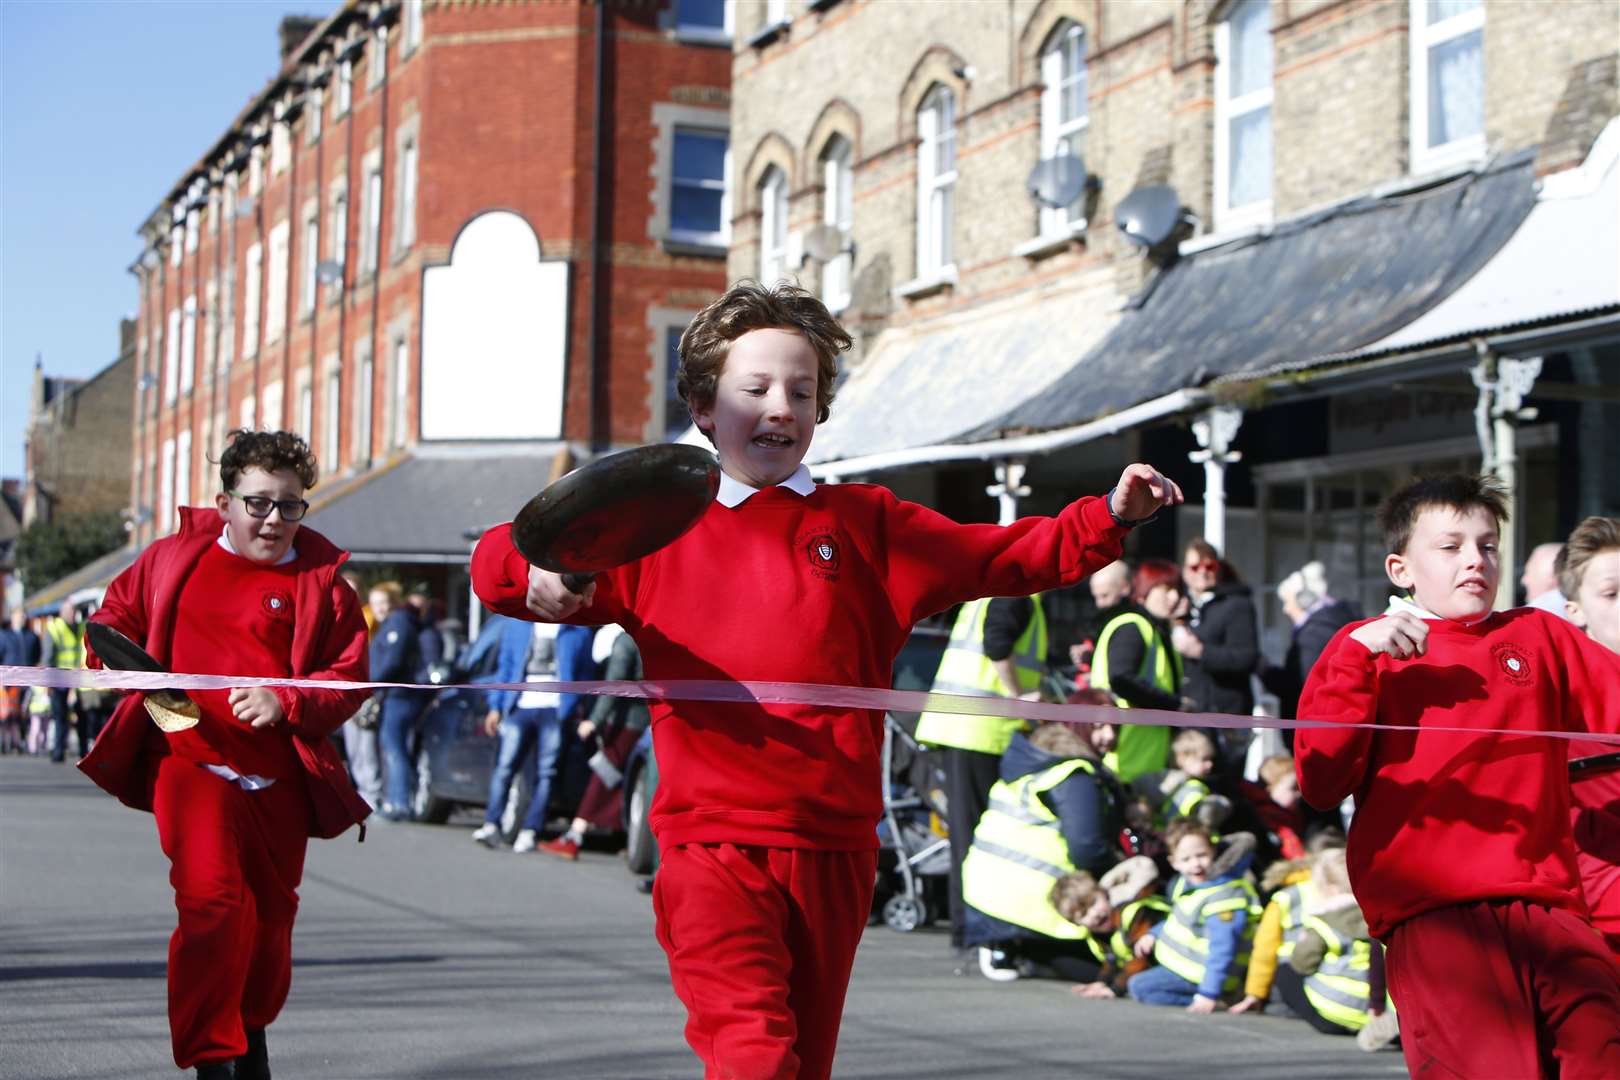 Children race to the finish line at the Westgate pancake race last year